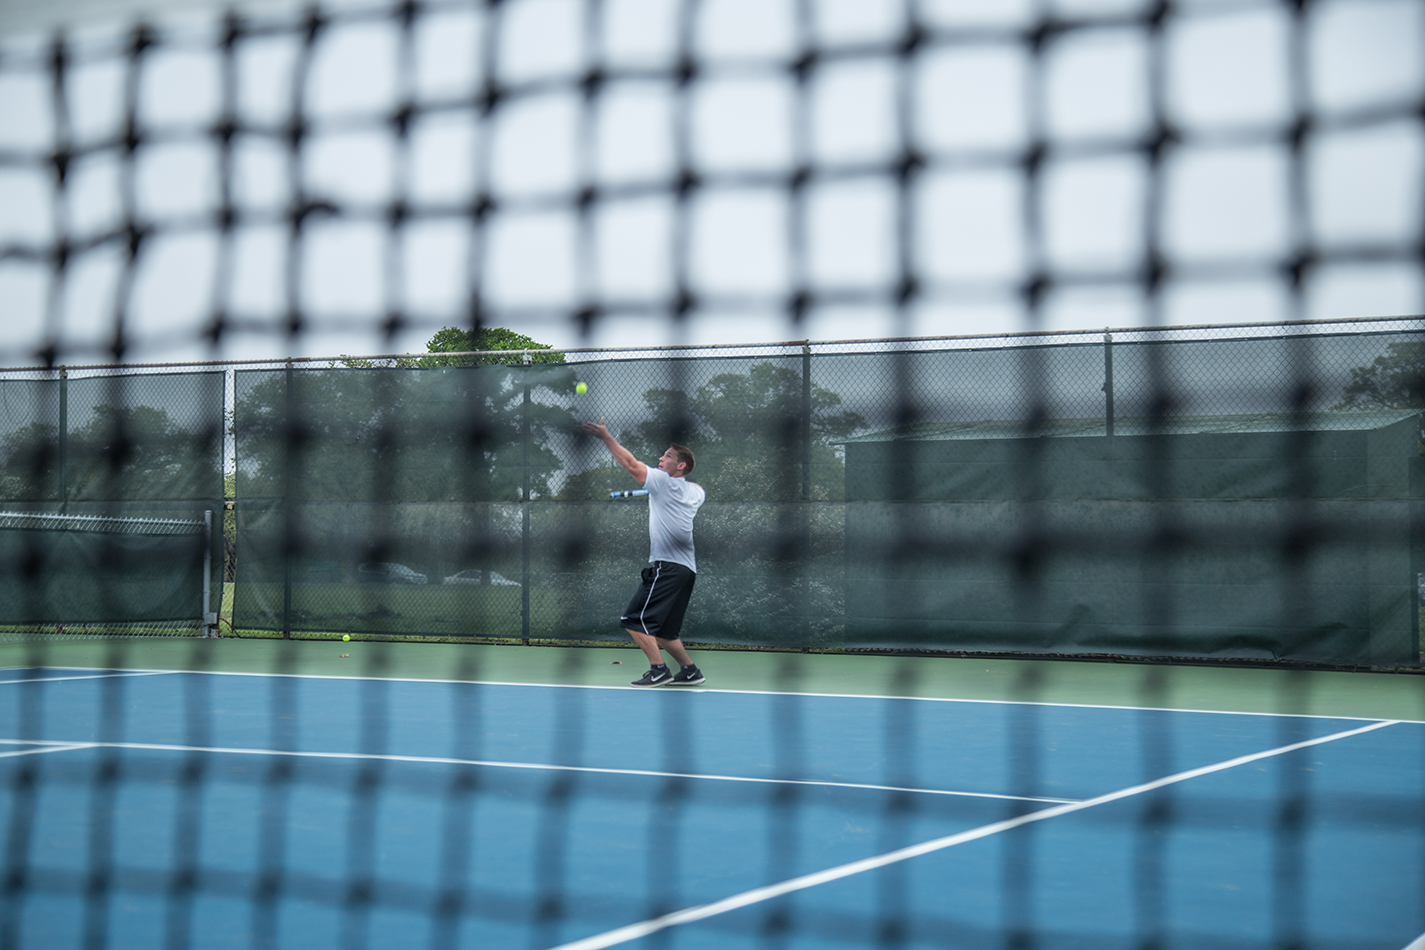 NE student David Schwartz serves during practice before the NE Tennis Club travels to the Tennis On Campus National Championship.